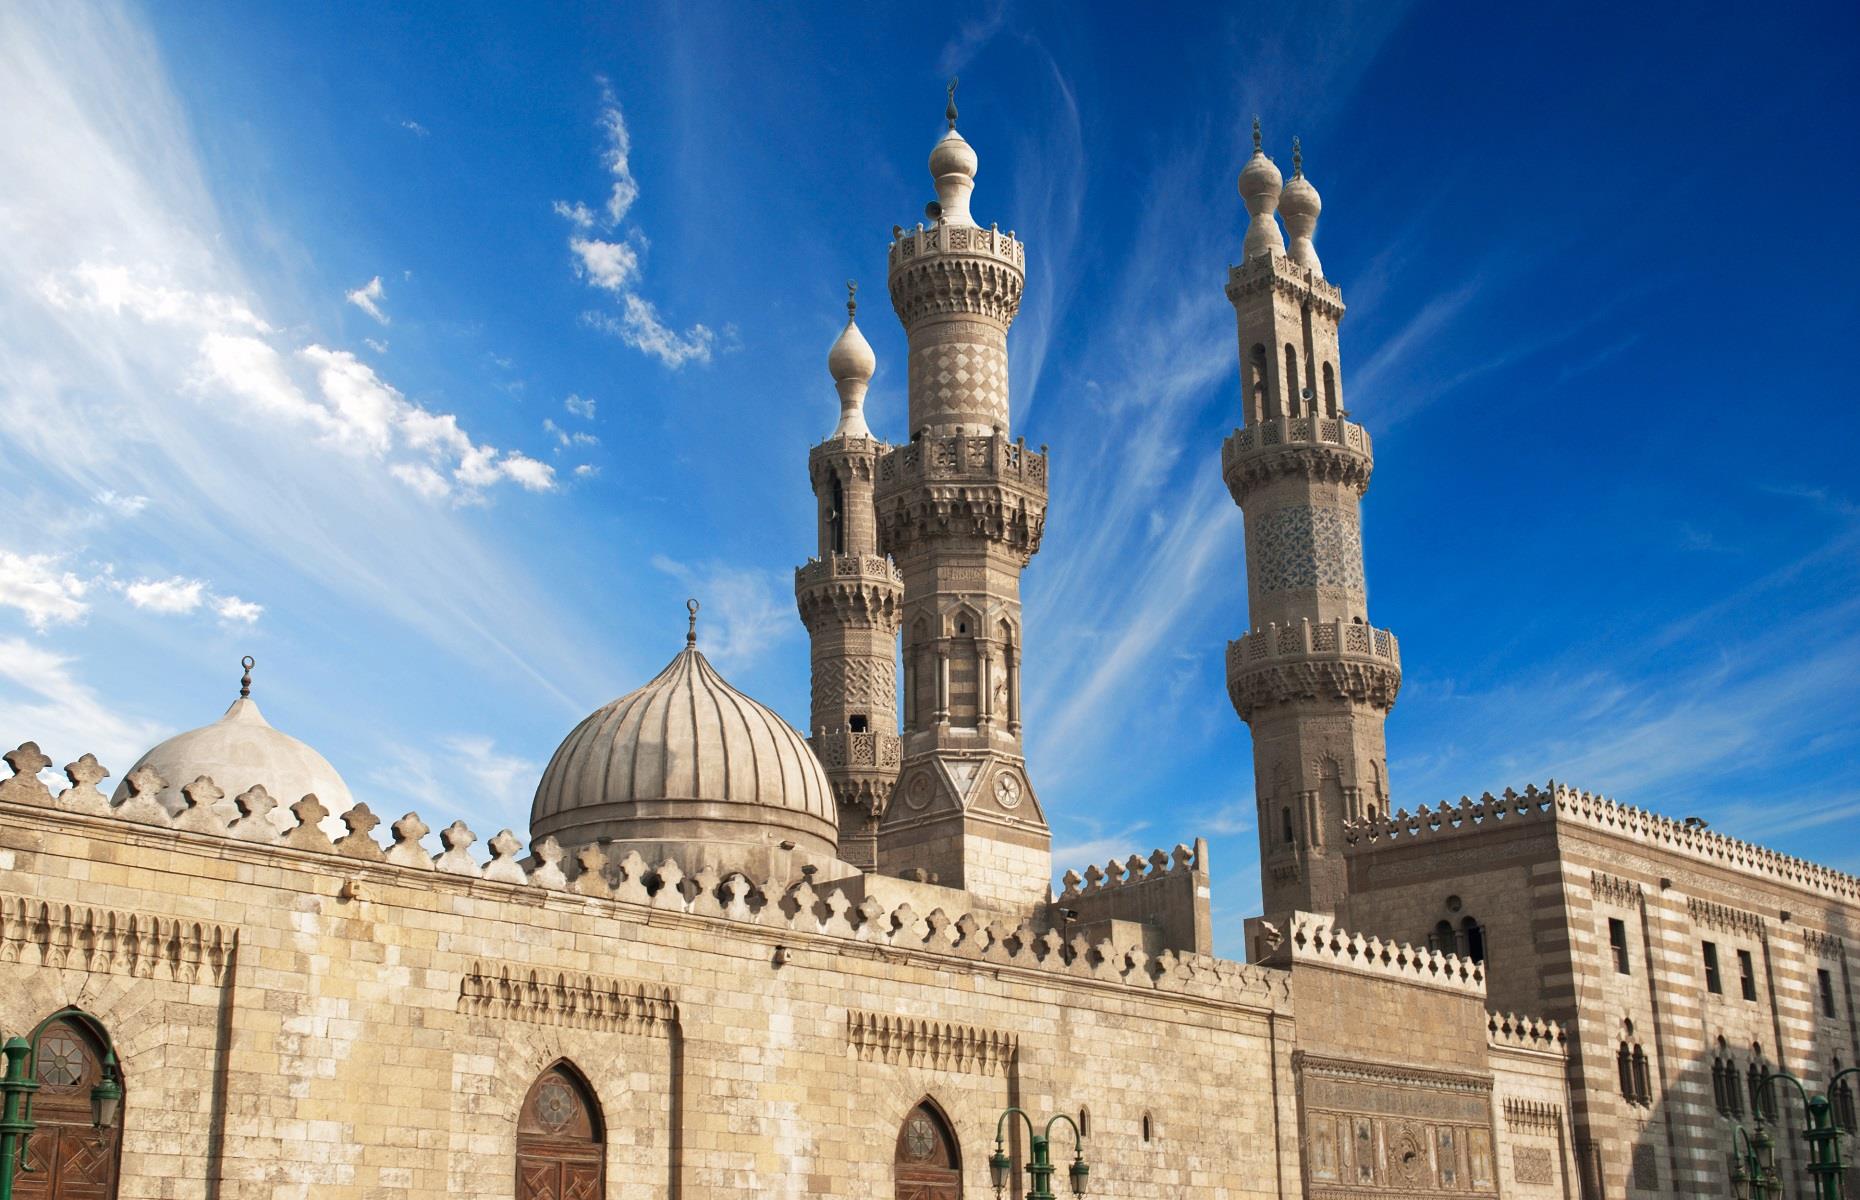 <p>Despite its beauty and age, there's a chance you've never heard of <a href="http://www.azhar.edu.eg/AboutUs/i">Al-Azhar University</a> in Cairo, Egypt. The ancient institution dates back to AD 970 and is among the largest universities in the world – not to mention one of the oldest. Renowned as the most prestigious site for Islamic learning, the college is housed inside the breathtaking Al-Azhar Mosque, which dates back to the Fatimid era. Tours are usually available and the mosque's white-marble courtyard should not be missed.</p>